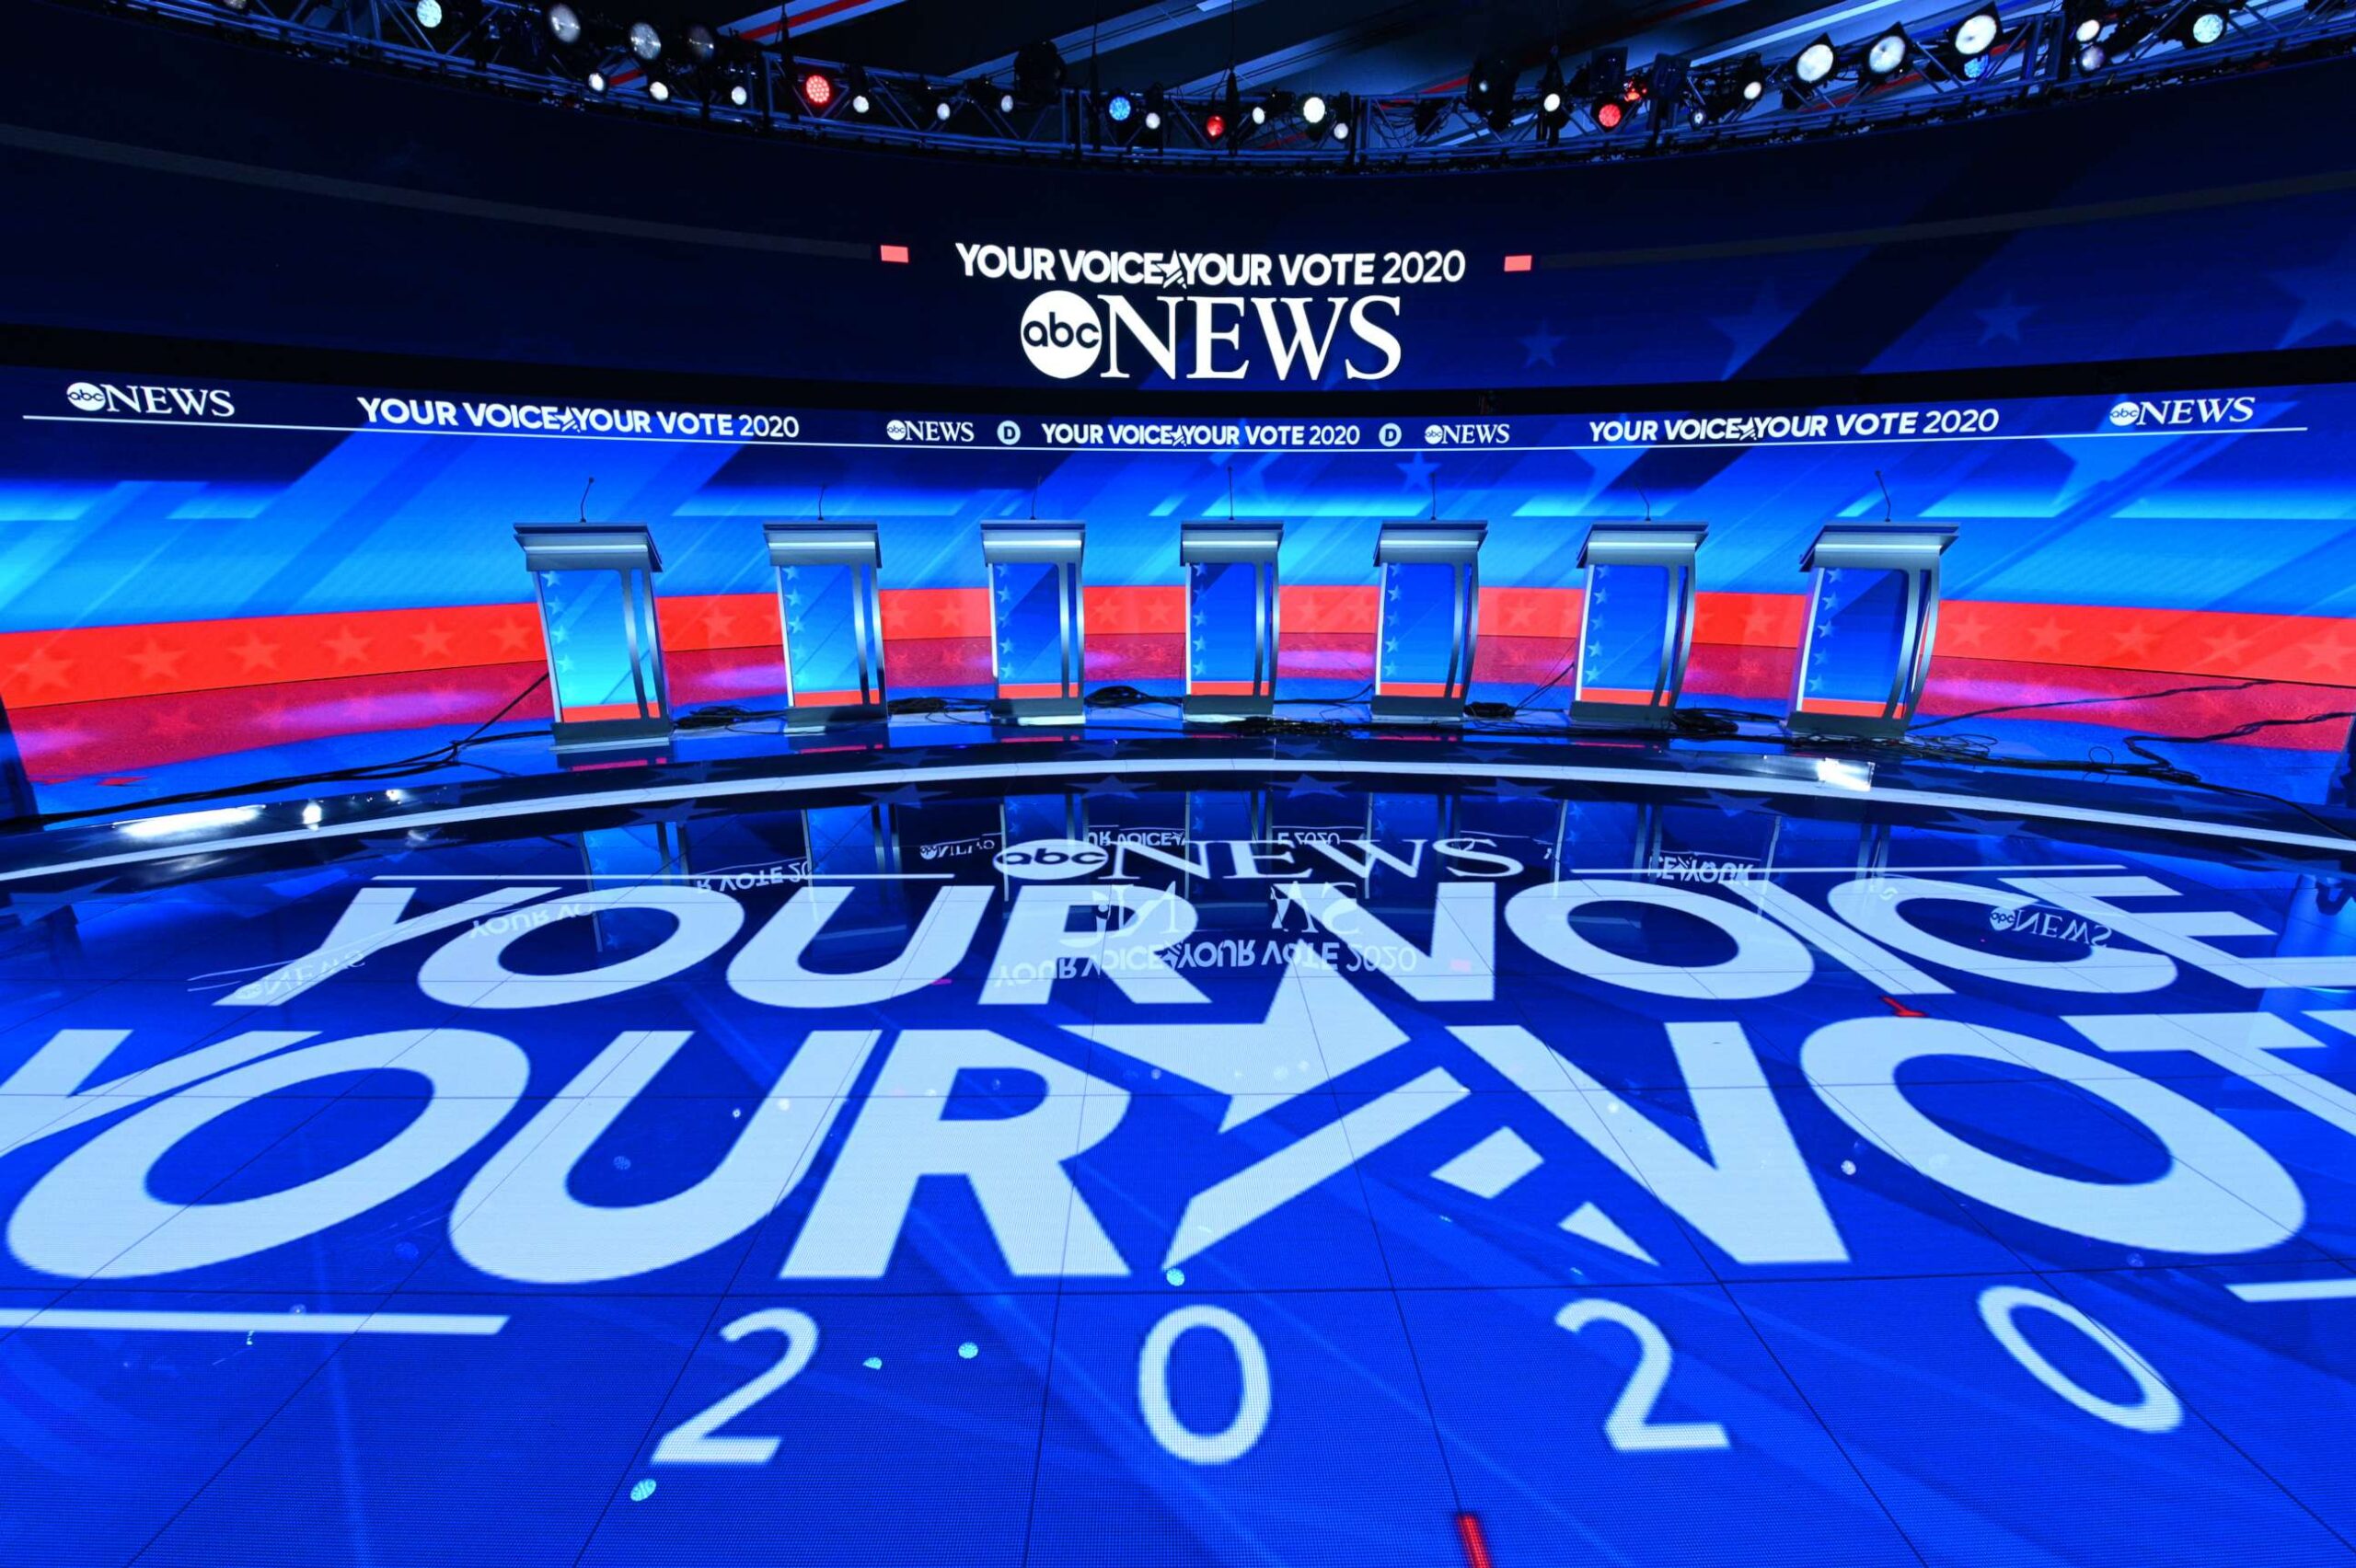 The debate stage in Manchester, New Hampshire